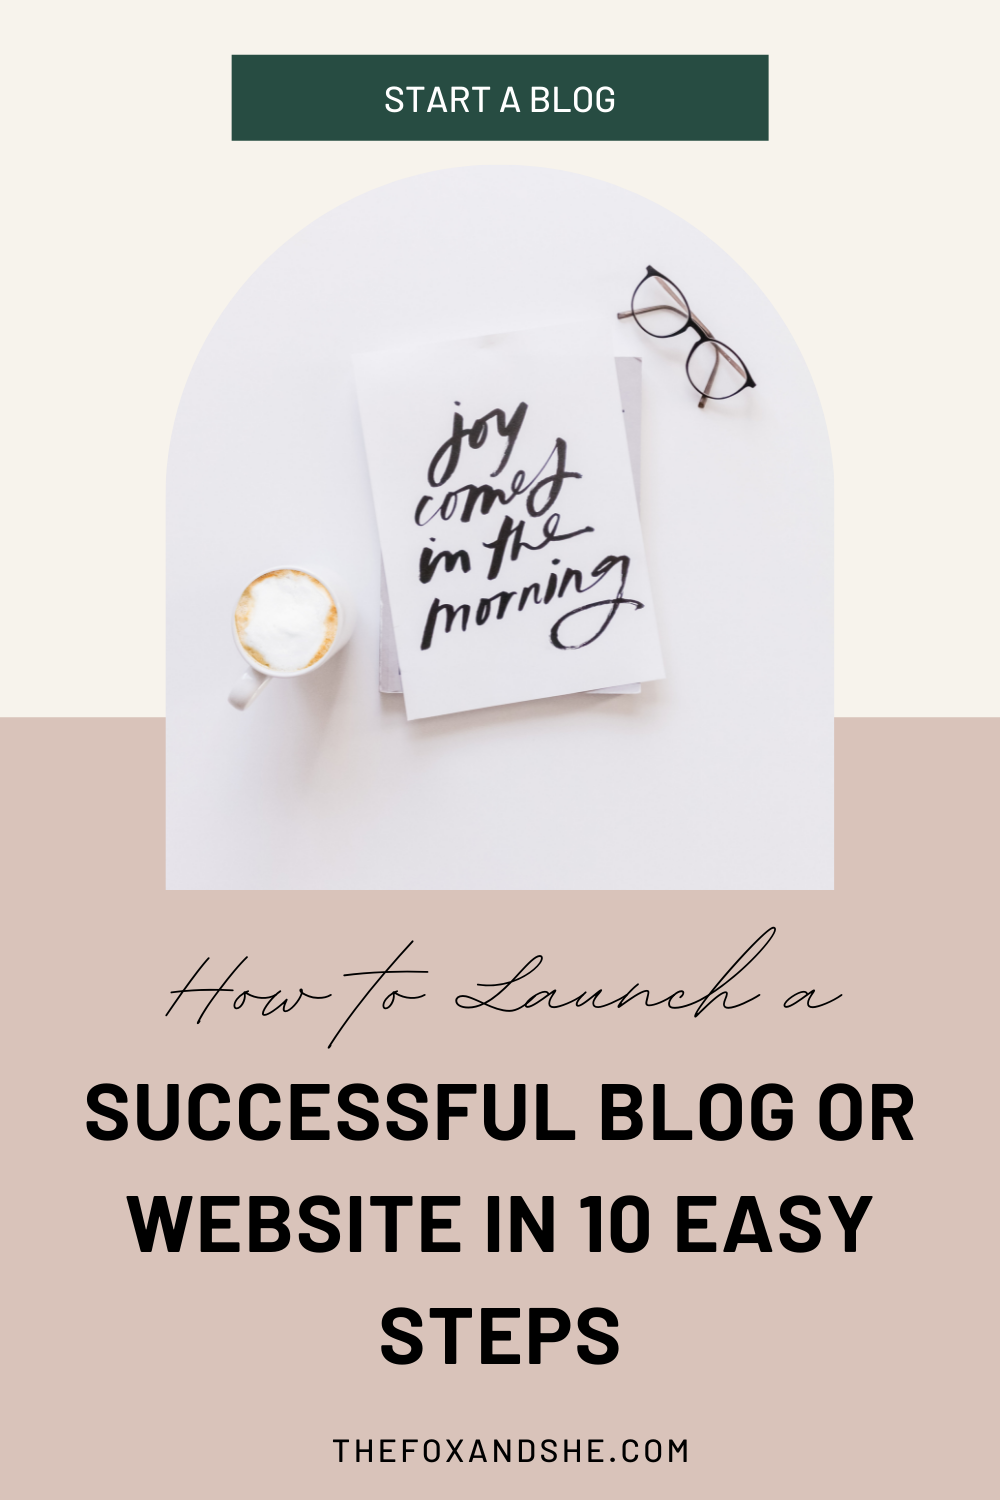 How to Launch a Blog in 10 Easy Steps